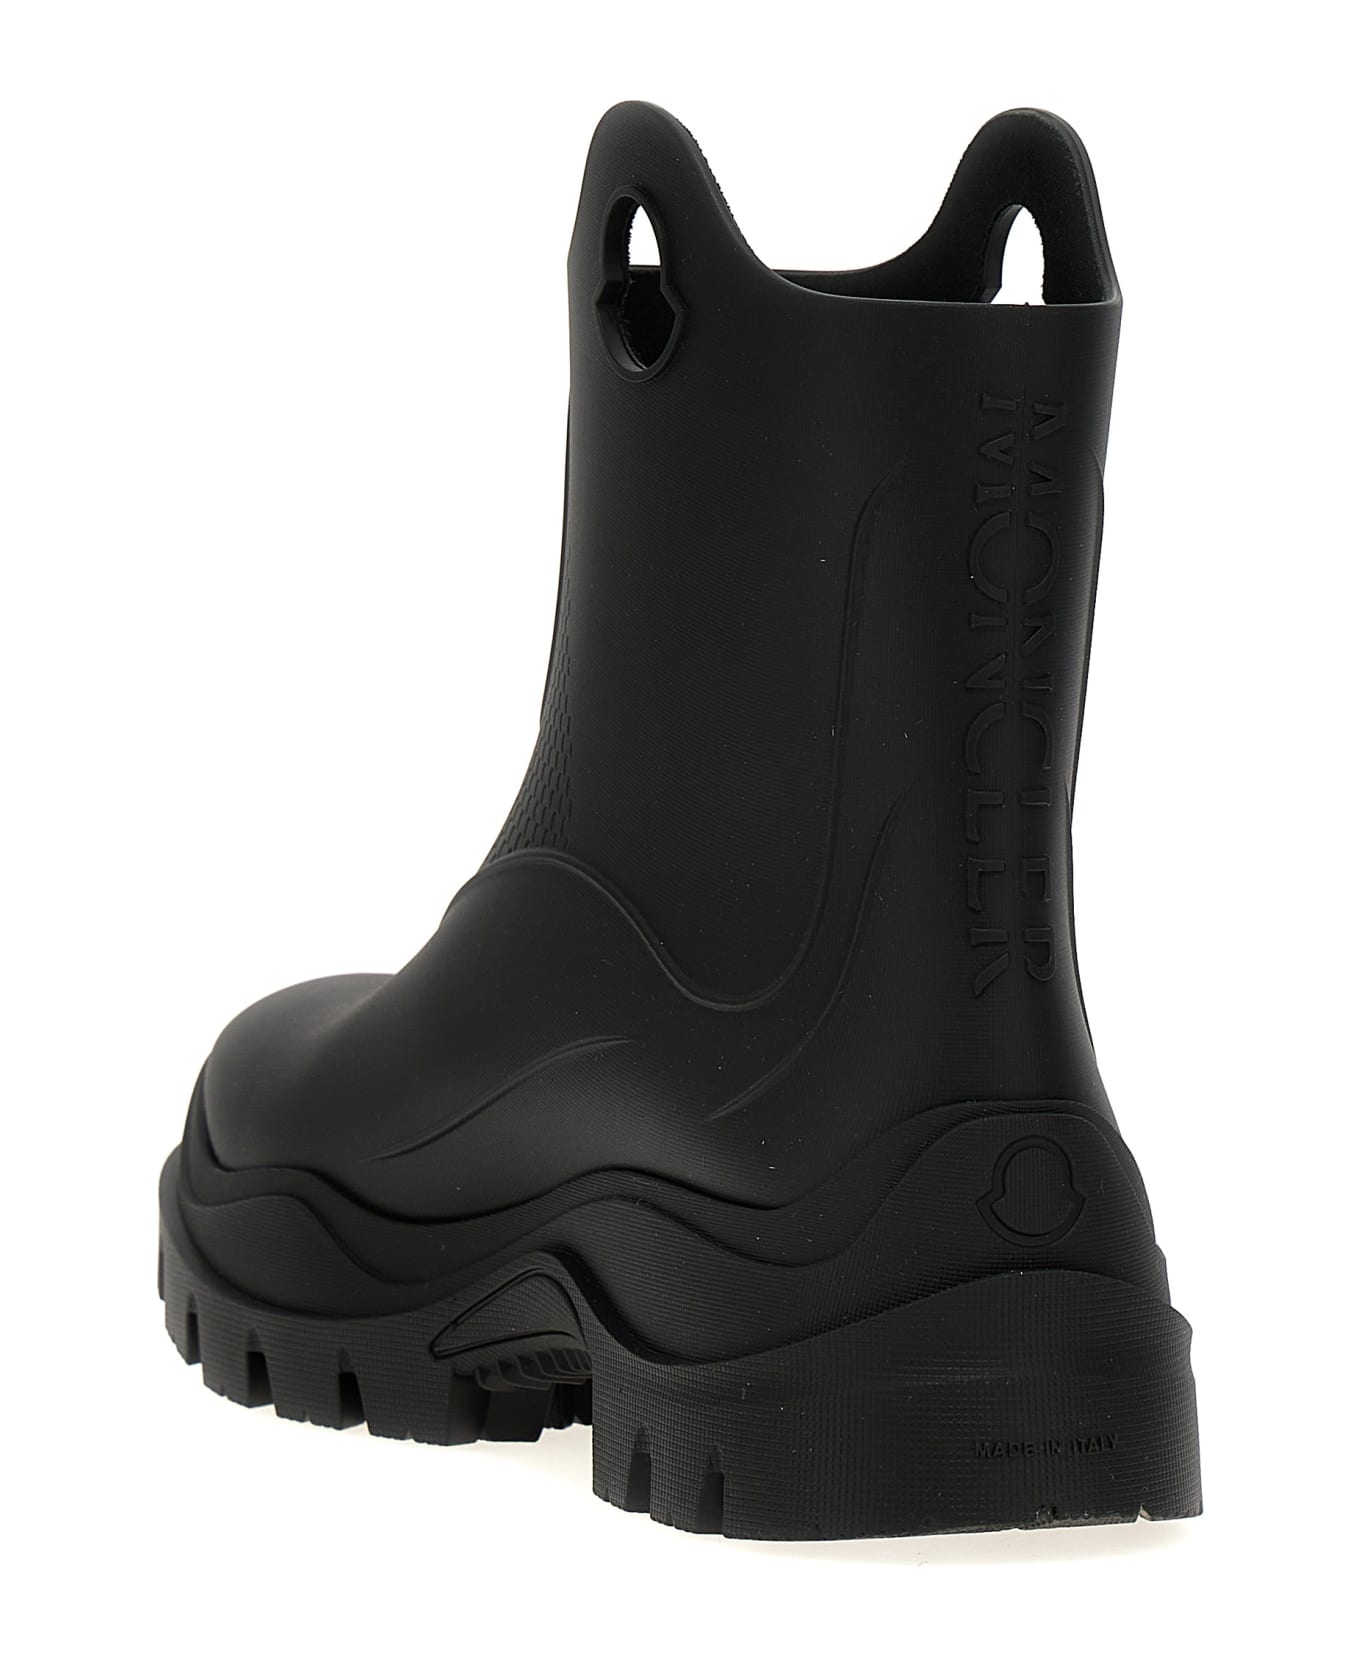 Moncler 'misty' Ankle Boots - Black ブーツ